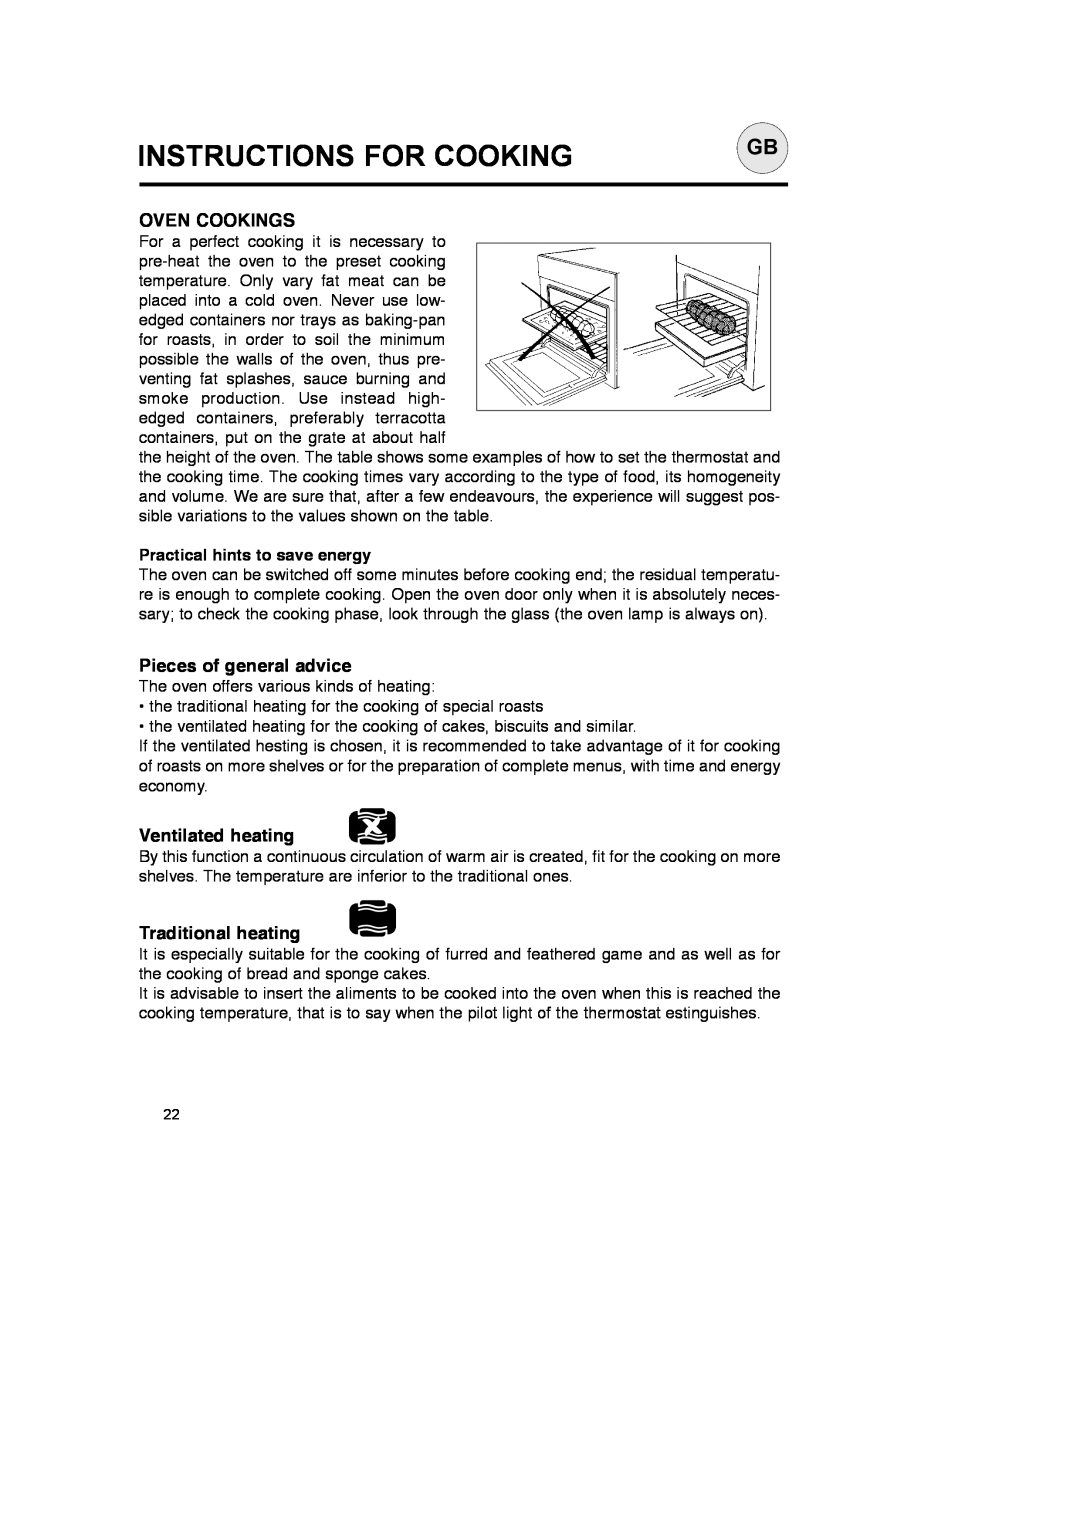 CDA SC145 manual Instructions For Cooking, Oven Cookings, Pieces of general advice, Ventilated heating, Traditional heating 